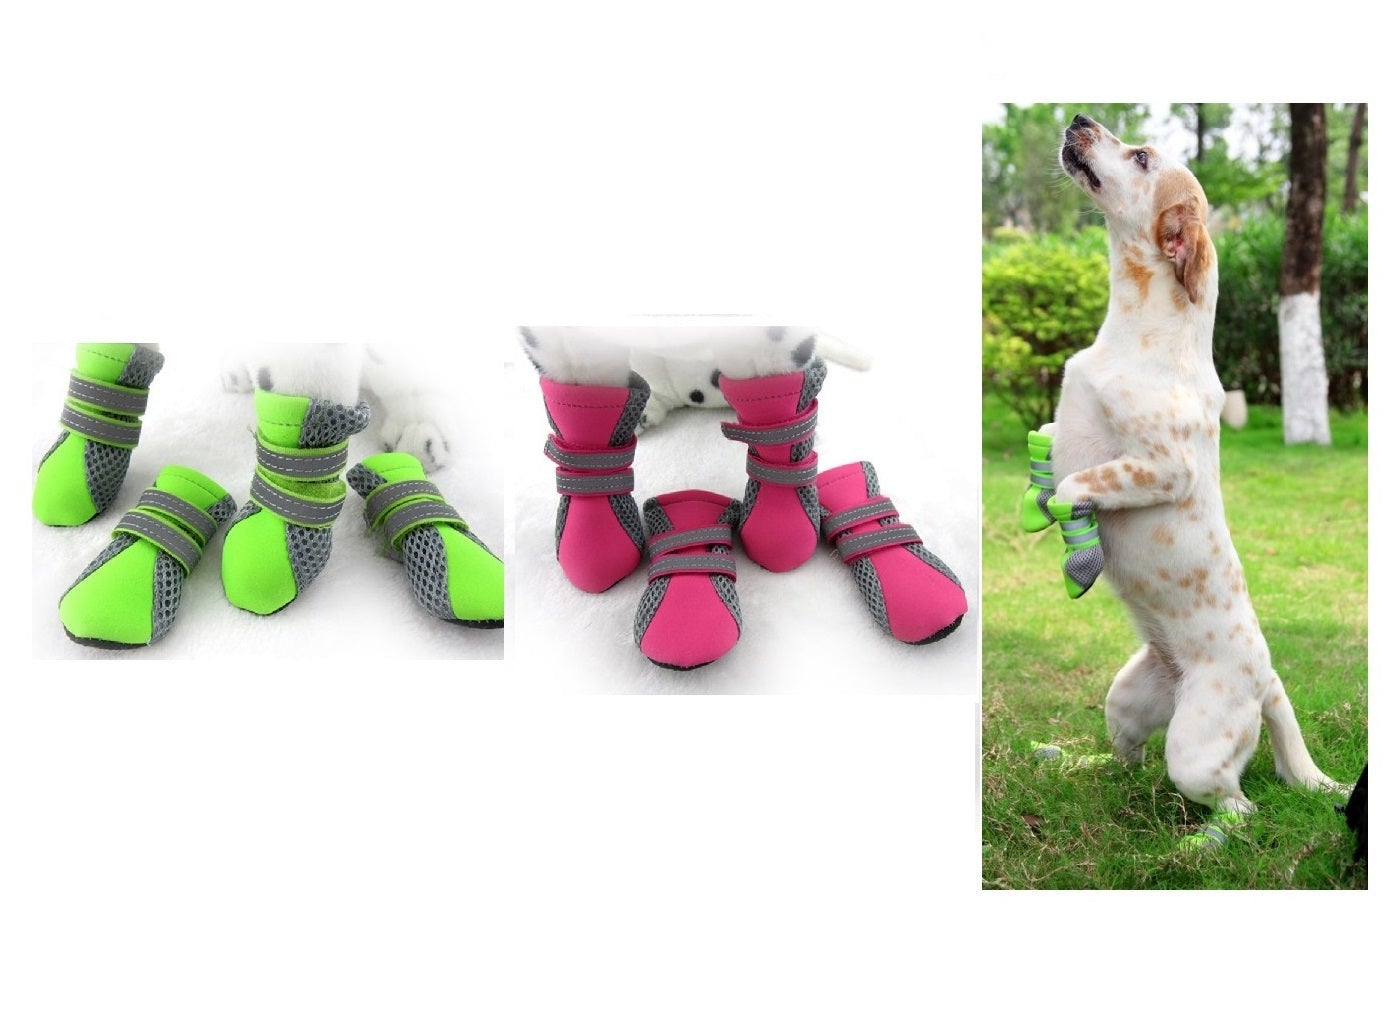 Dog / Cat Shoes Protective Waterproof Neoprene Running Boots Paws Injury